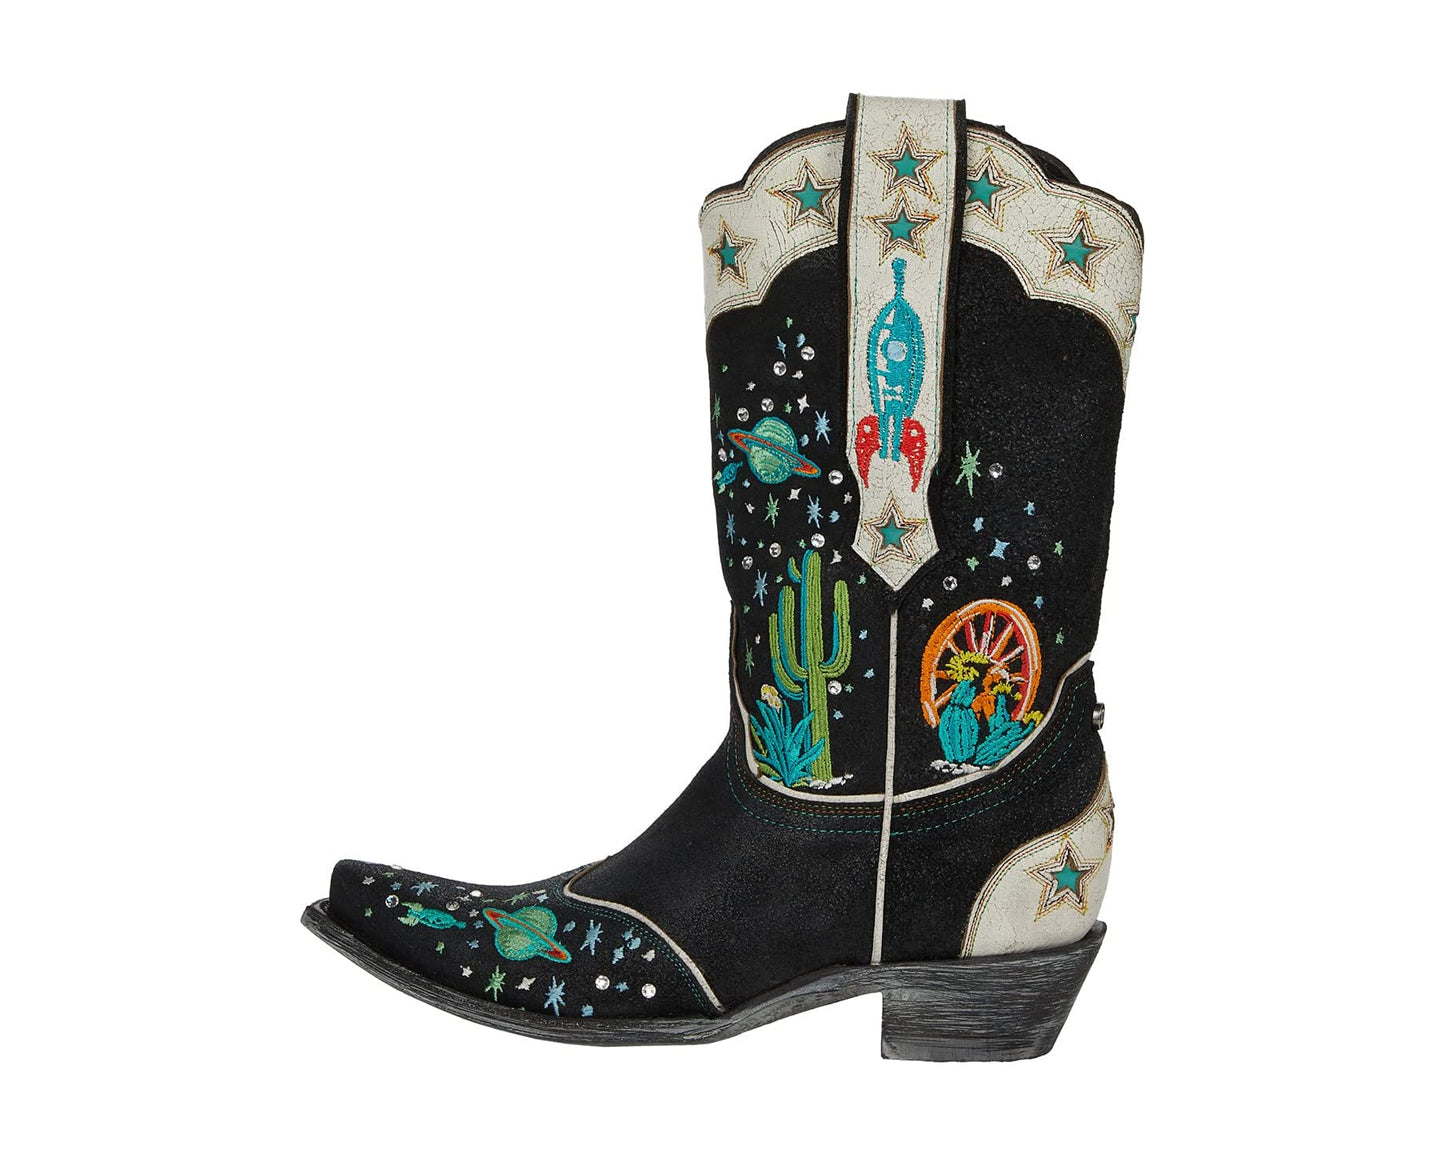 Double D Ranch by Old Gringo Space Cowboy Boots